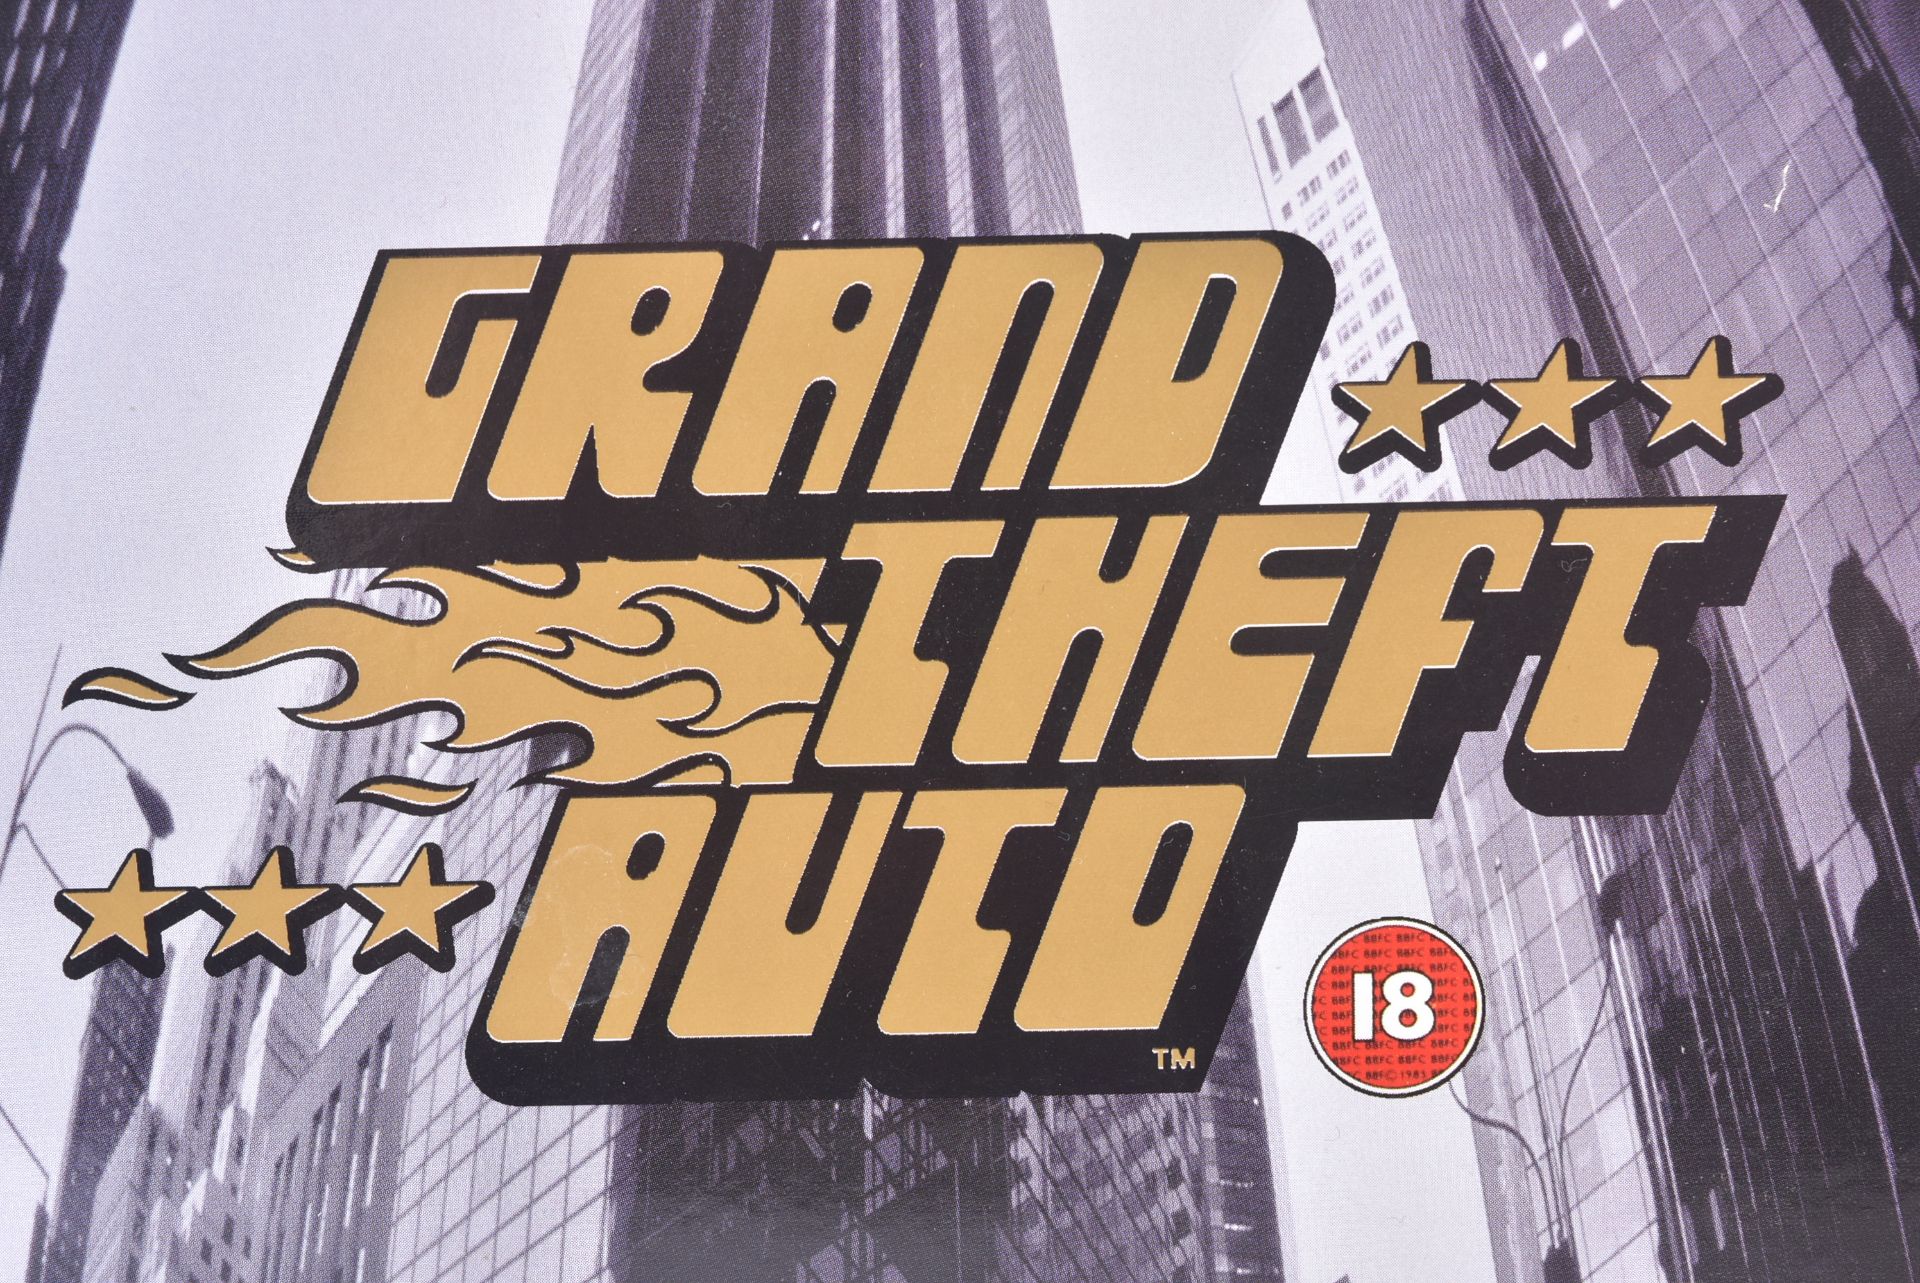 RETRO GAMING - LIMITED EDITION GRAND THEFT AUTO BIG BOX PC GAME - Image 2 of 5